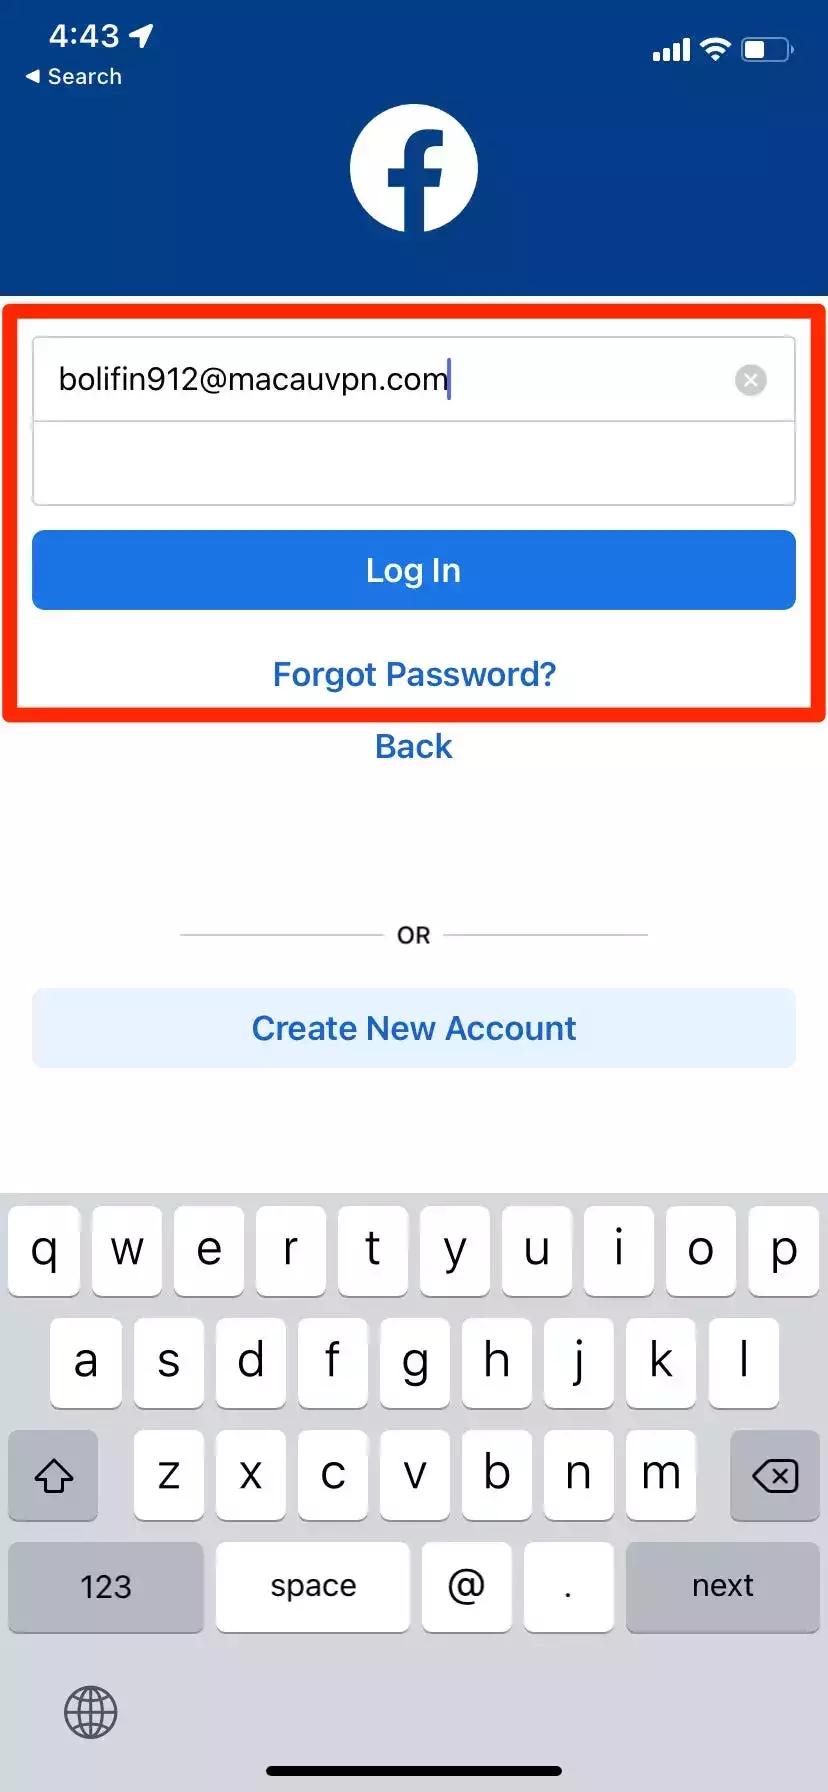 How to log into Facebook on a computer or mobile device, even if you don't know your password